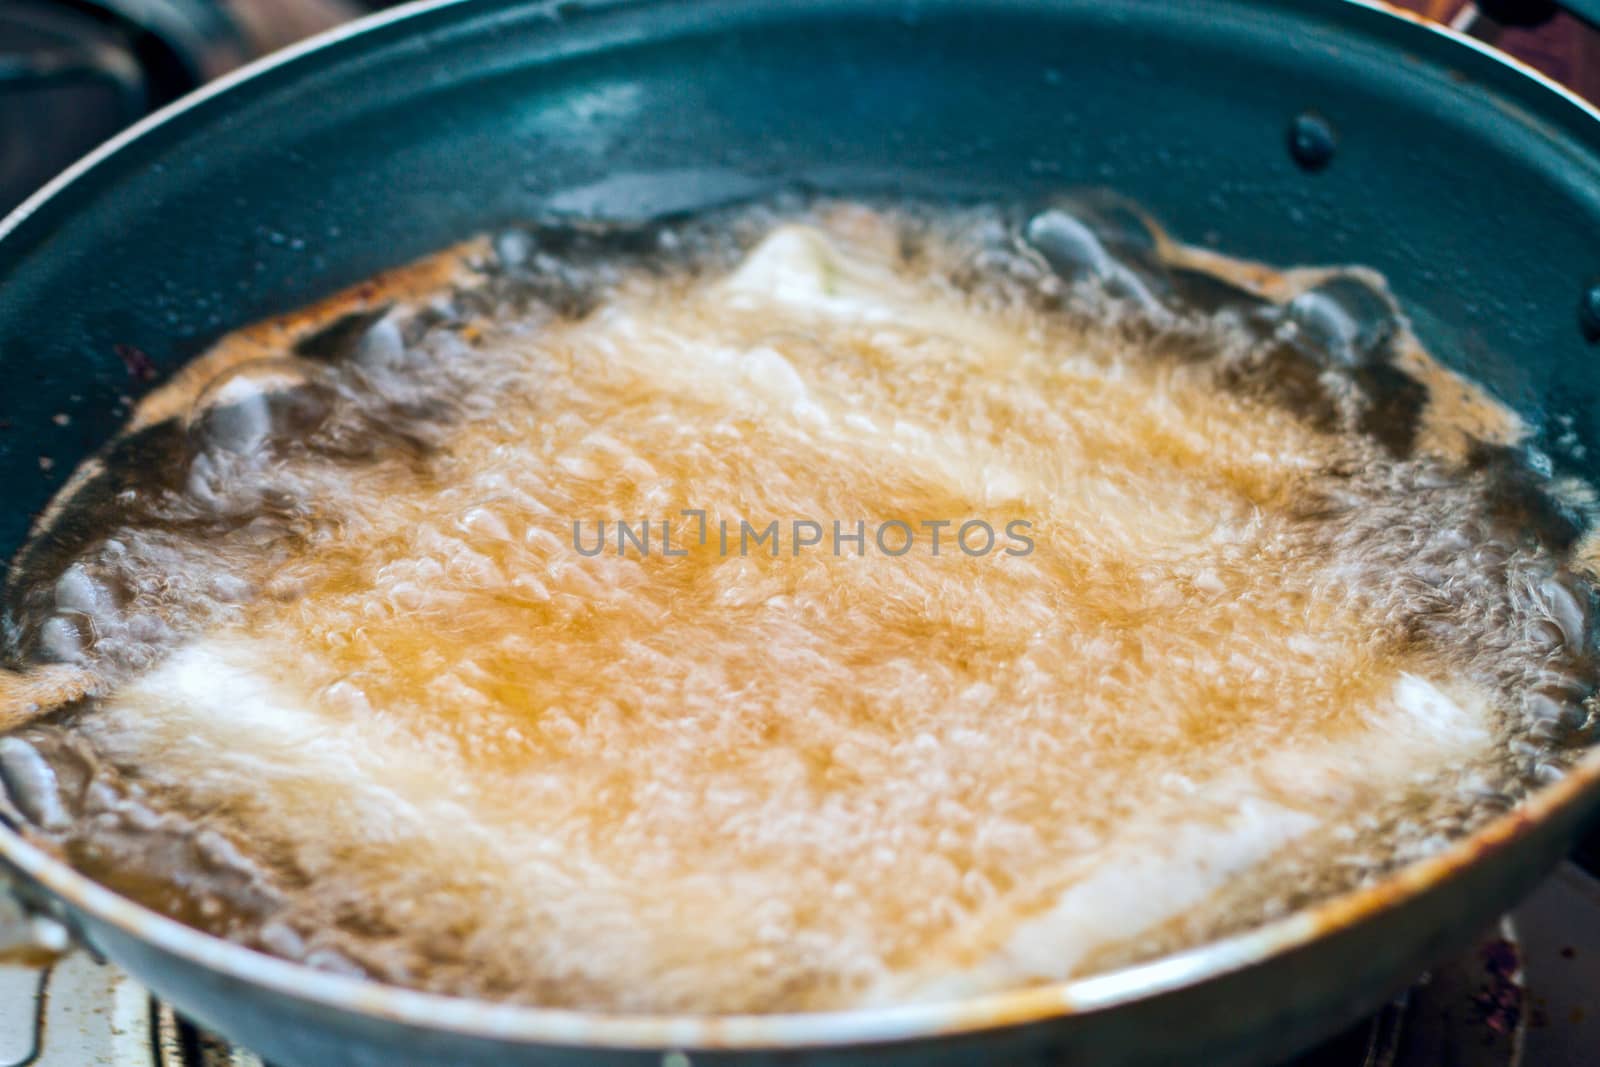 boiling oils from frying sausages.